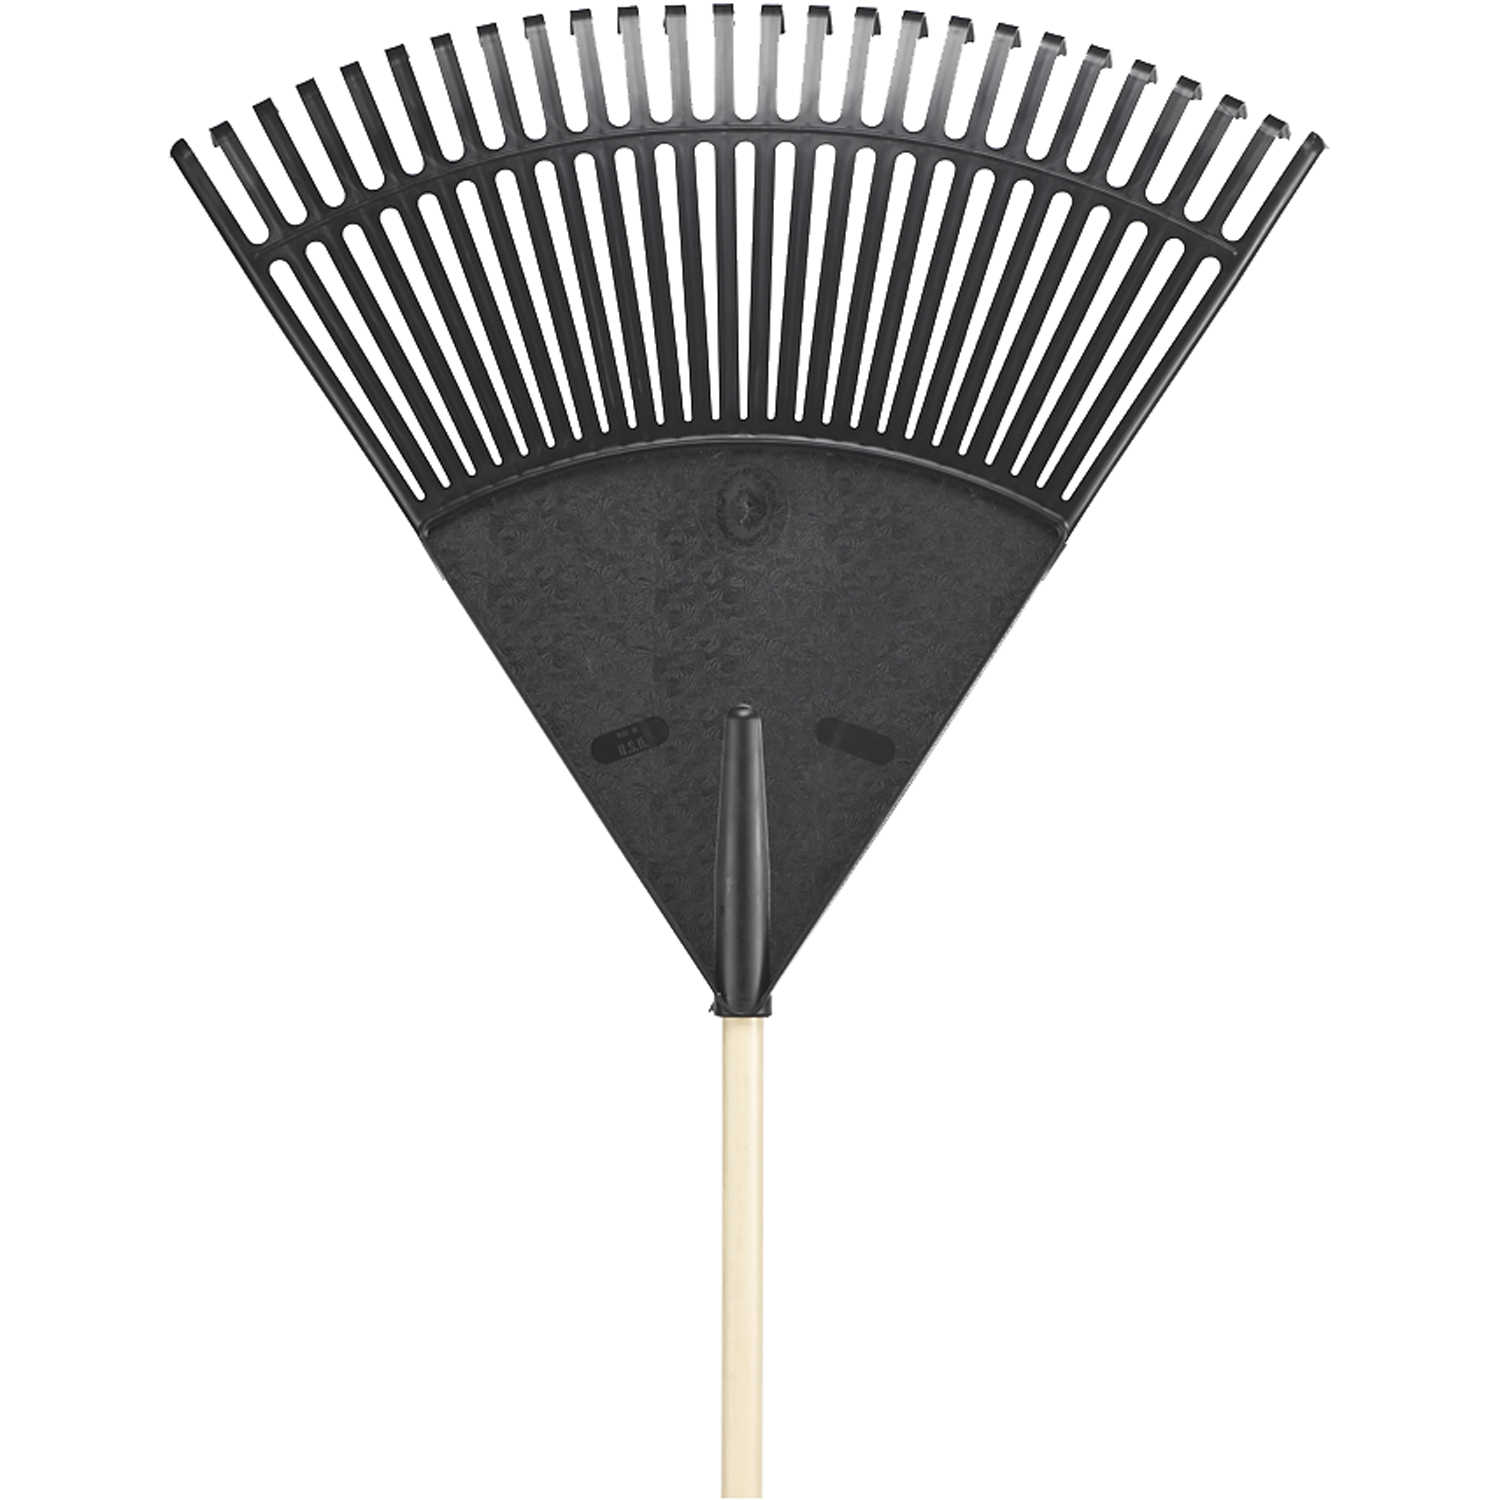 UnionTools 24 Poly Rake | Forestry Suppliers, Inc.